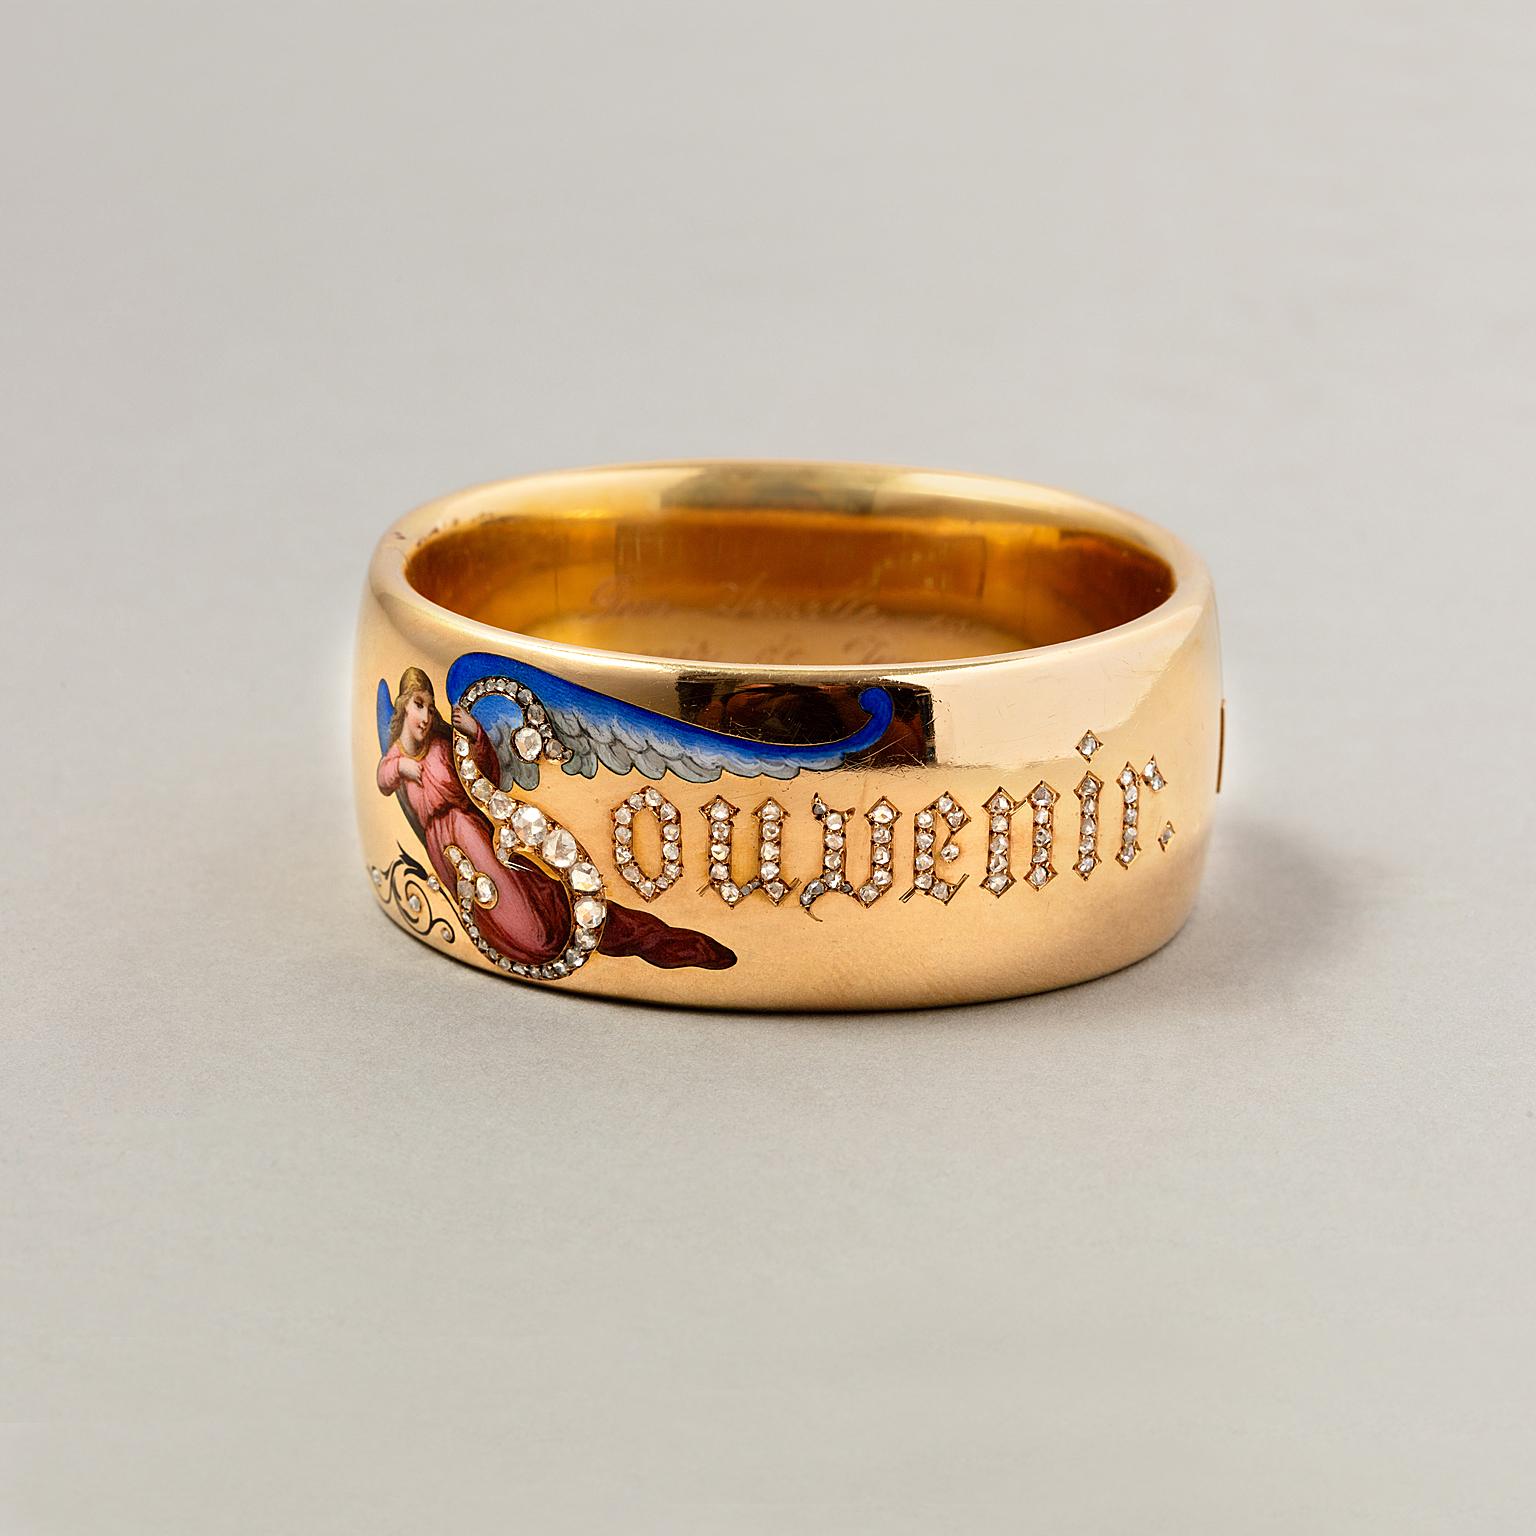 Sentimental jewellery and jewels with messages, such as 'Forget Me Not', 'Spes' or 'Souvenir', were hugely popular during the Victoria era. These mottos would recall a Grand Tour or adorn holiday keepsakes. However, more often 'Souvenir' would refer